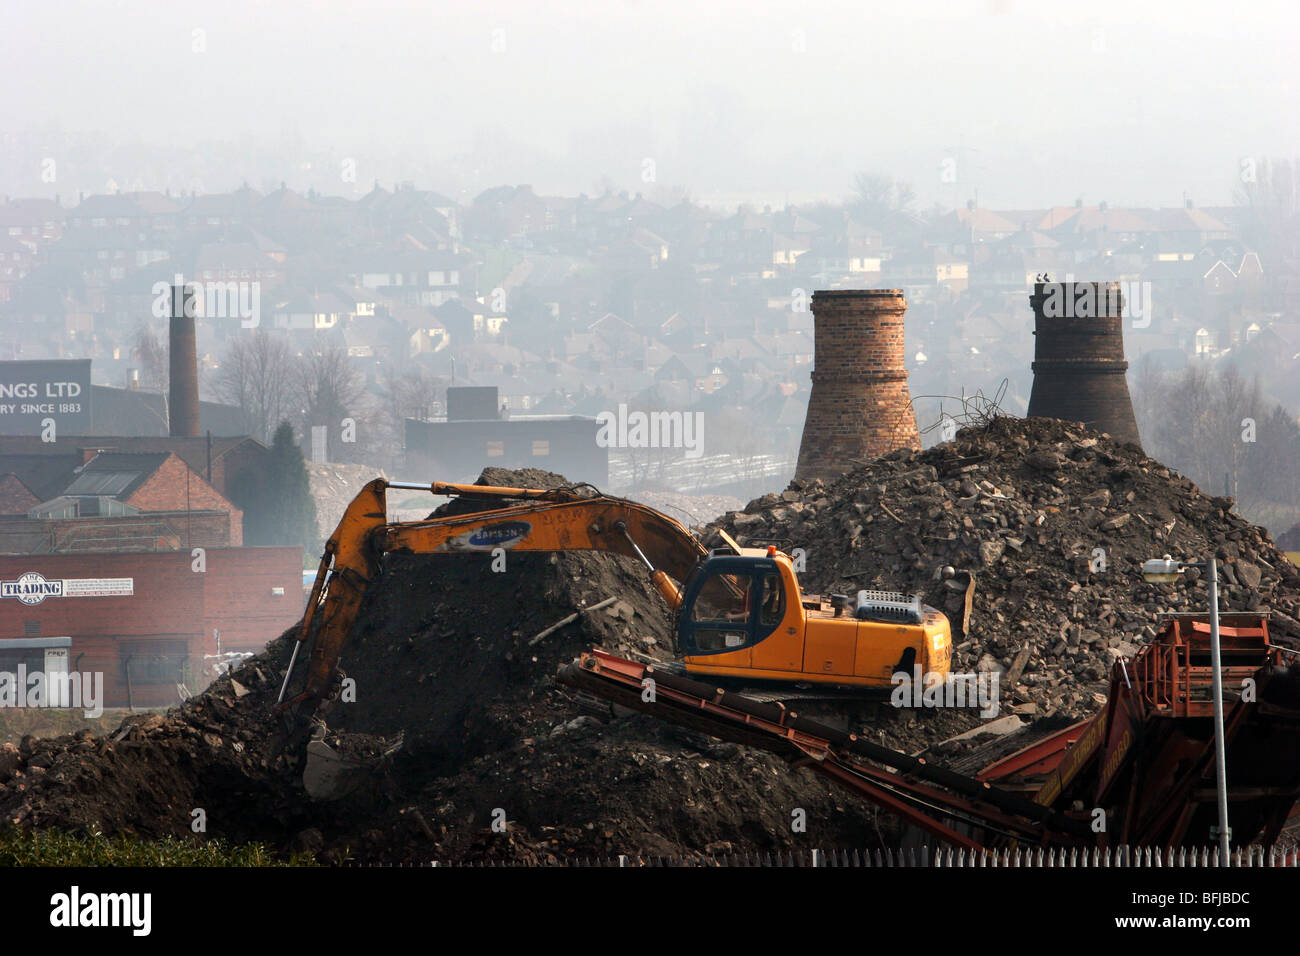 A JCB style digger clearing rubble in Stoke on Trent, Staffordshire with a city skyline including pot banks in the background Stock Photo